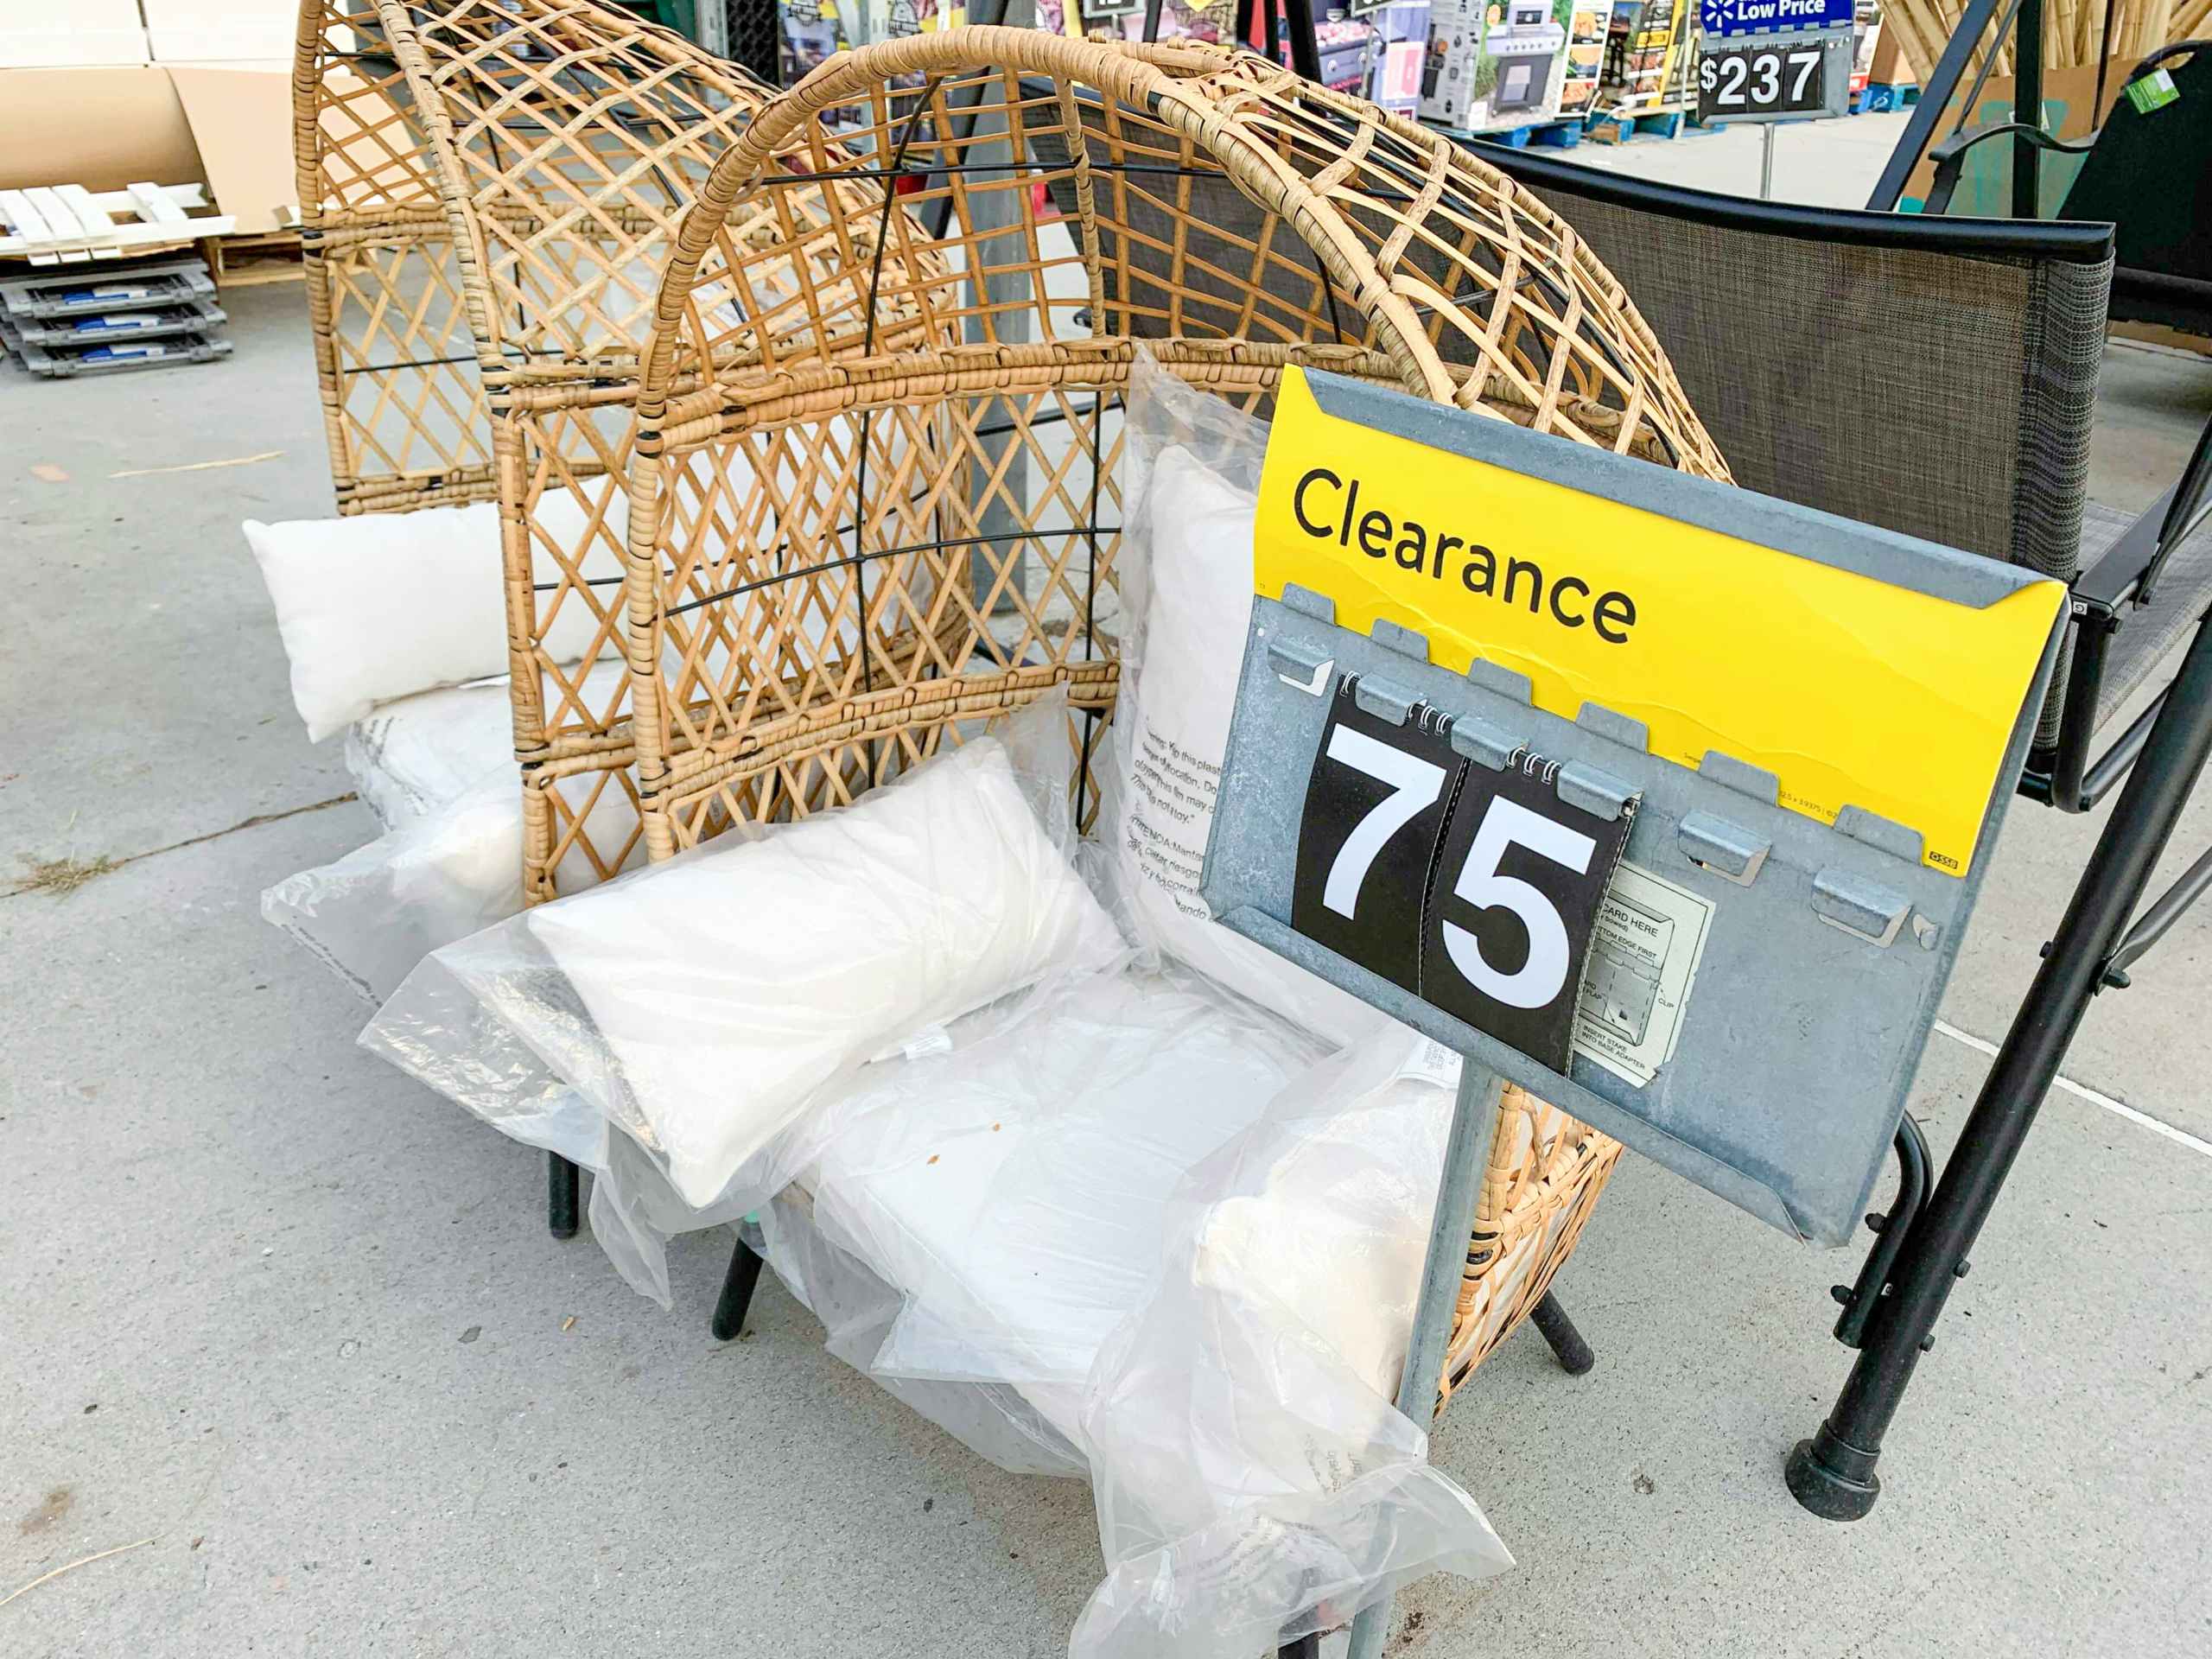 kids egg chair on clearance at Walmart